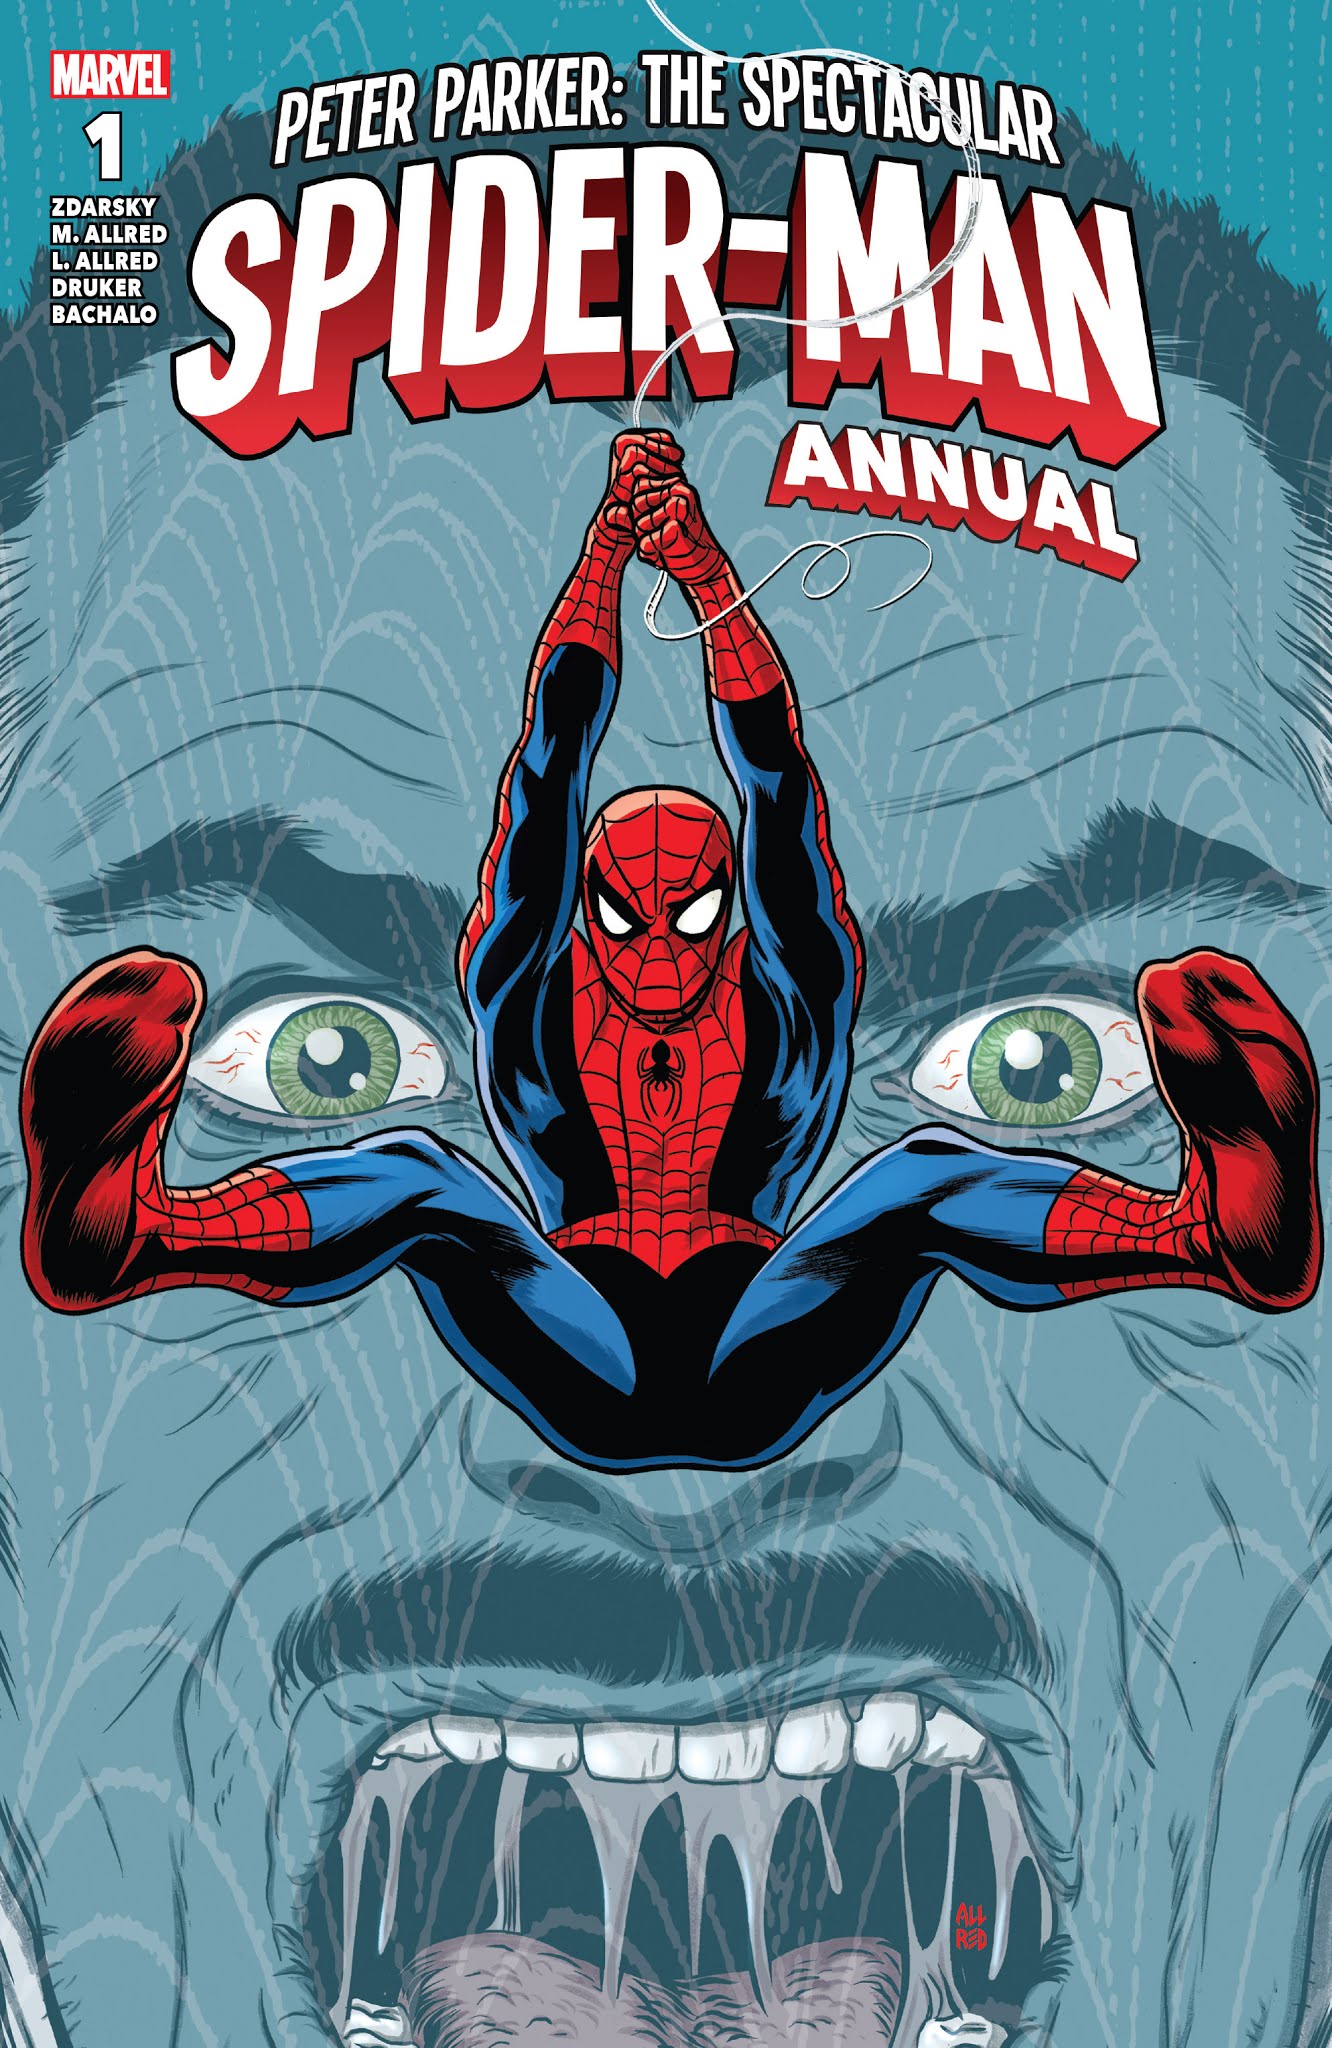 Read online Peter Parker: The Spectacular Spider-Man comic -  Issue # Annual 1 - 1